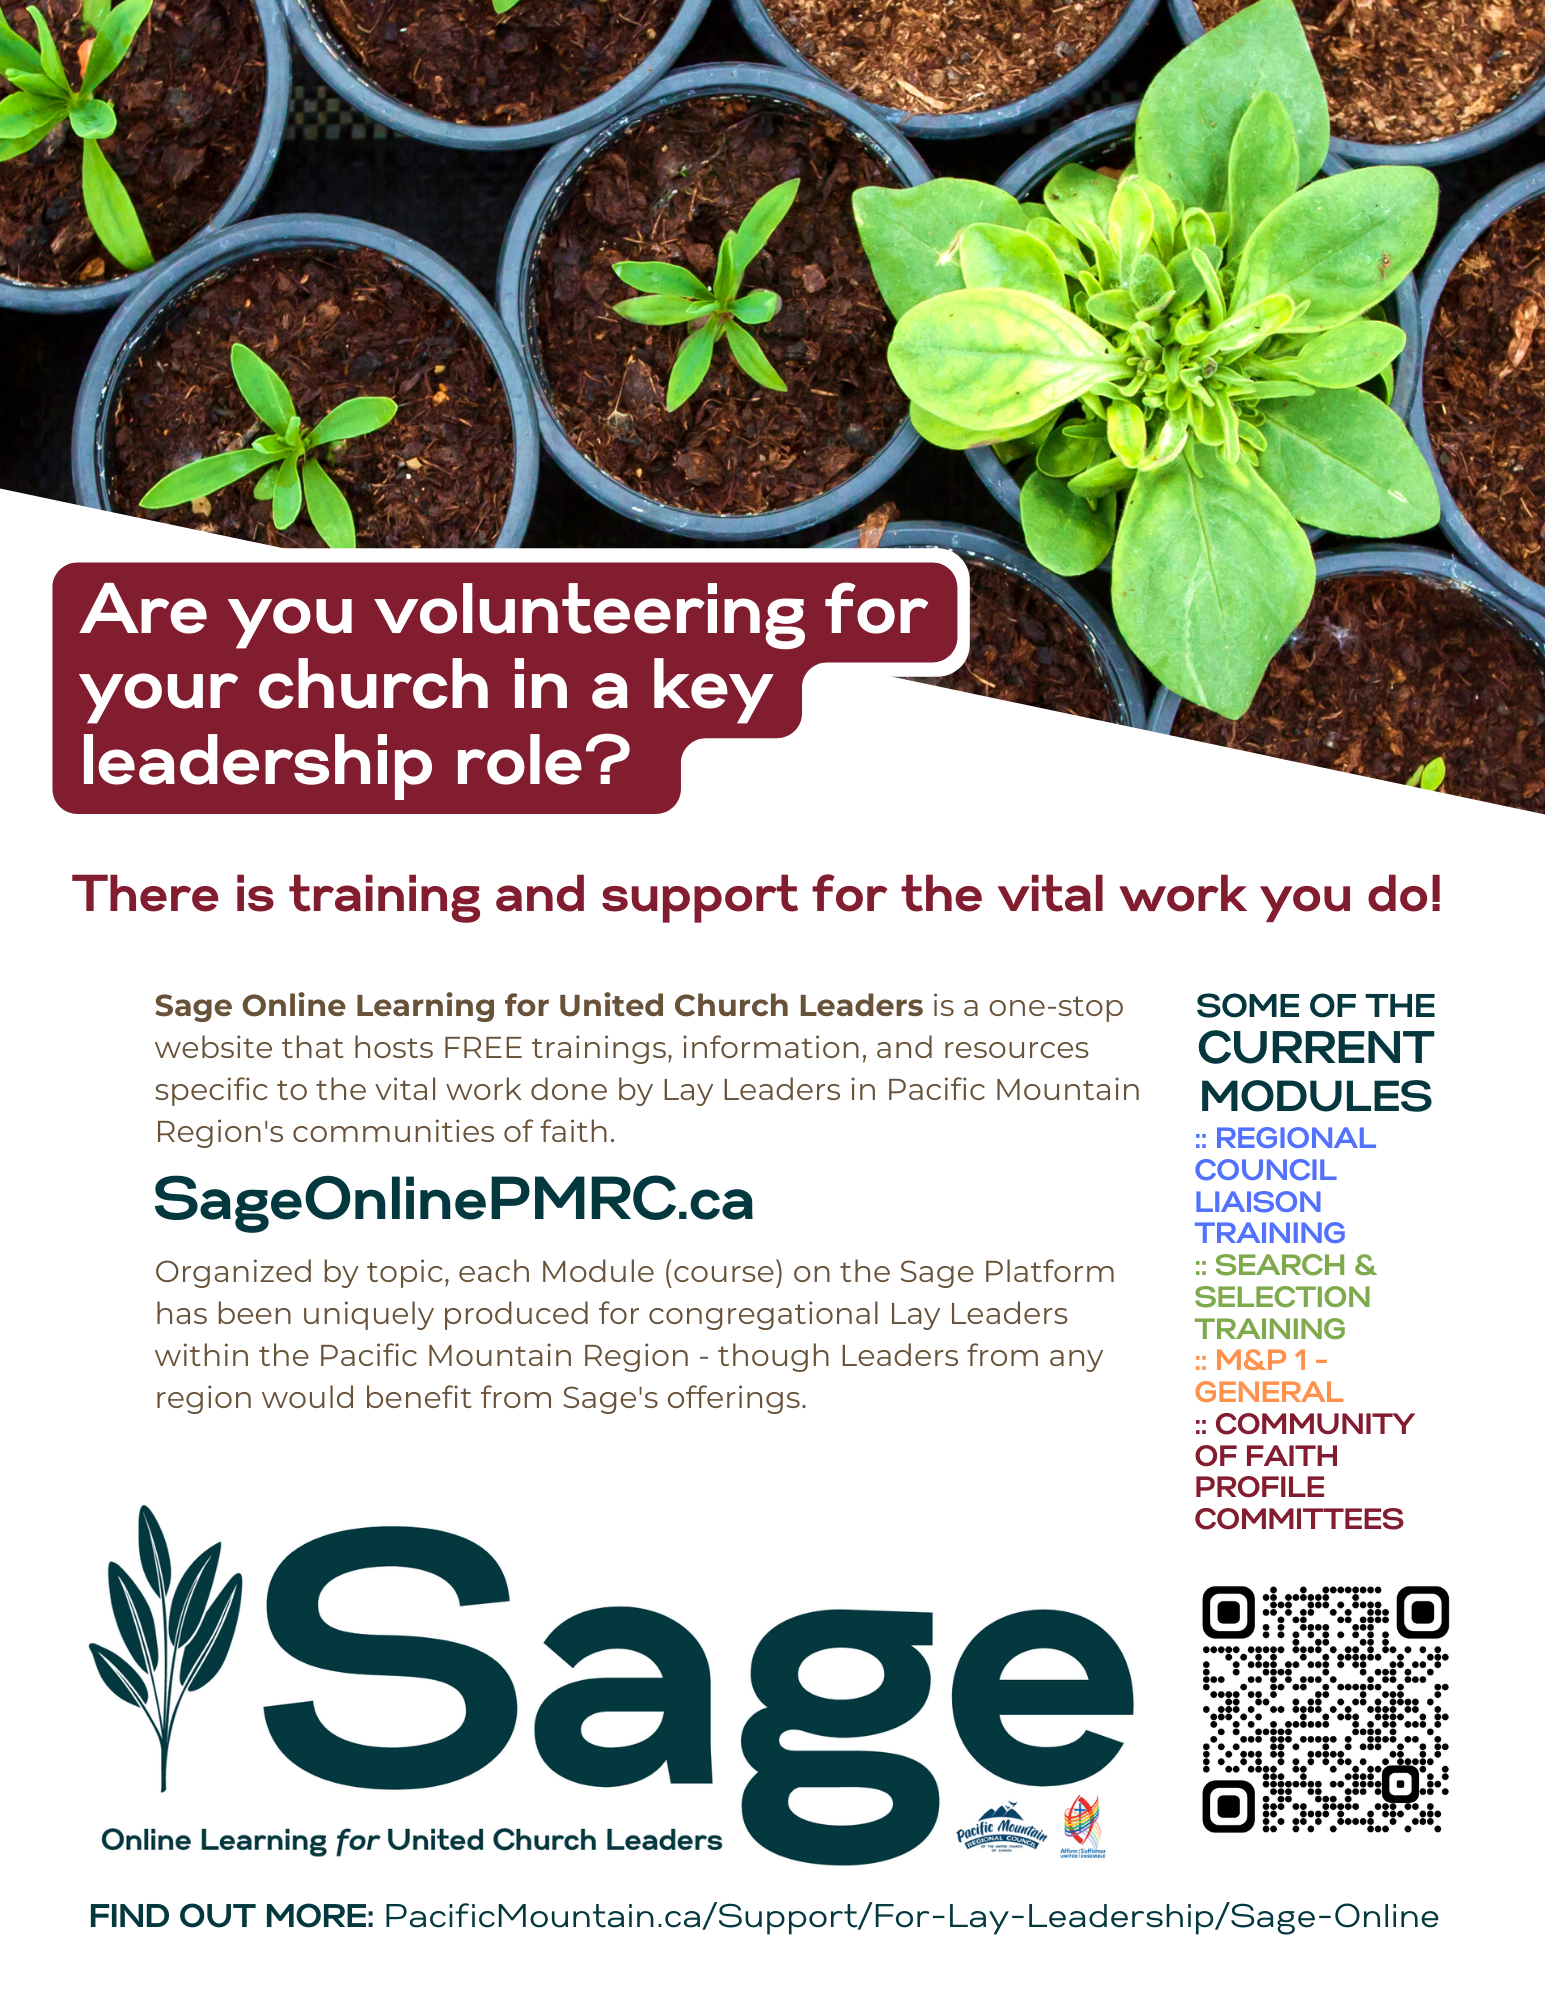 Letter-size Flyer for Sage Online Learning Platform. Please Print and Post in Your Church.